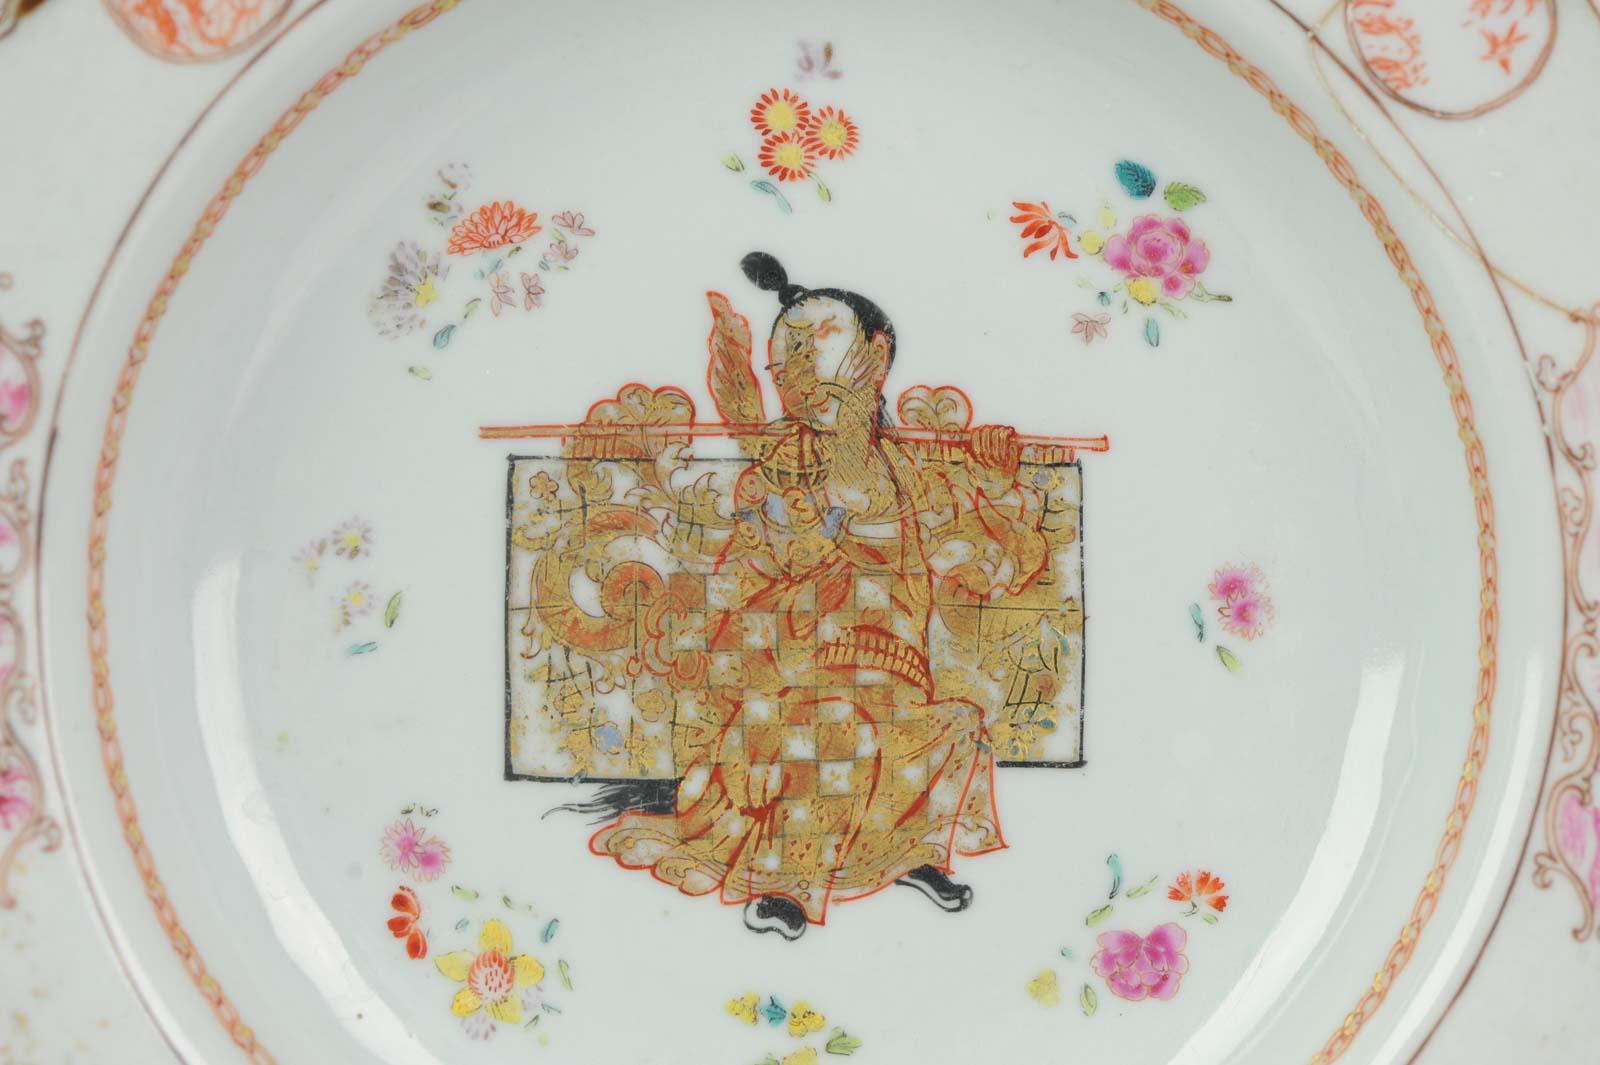 A rare and quality painting plate. It's a chine de commande dish but unusual because the central painting of a Chinese person with a Chinese person holding an artifact with a dragon in gilt. He is also holding a ruyi scepter.

Very nicely